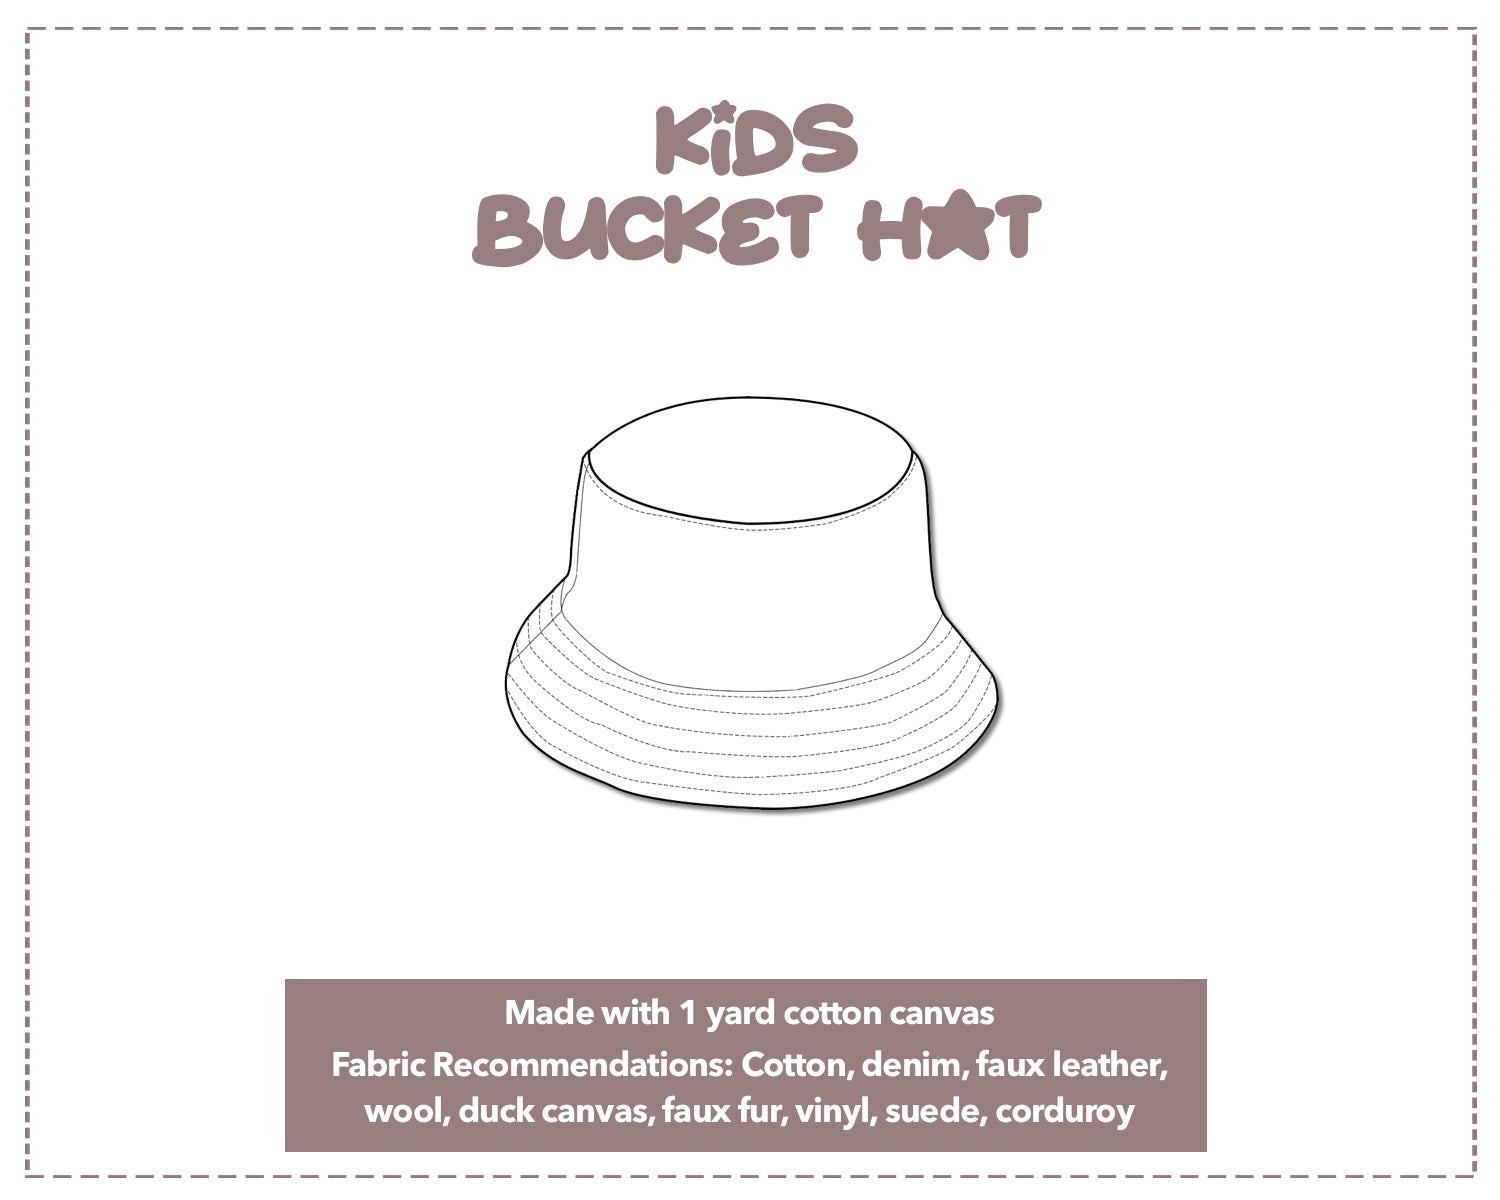 Illustration and detailed description for Kids Bucket Hat sewing pattern.